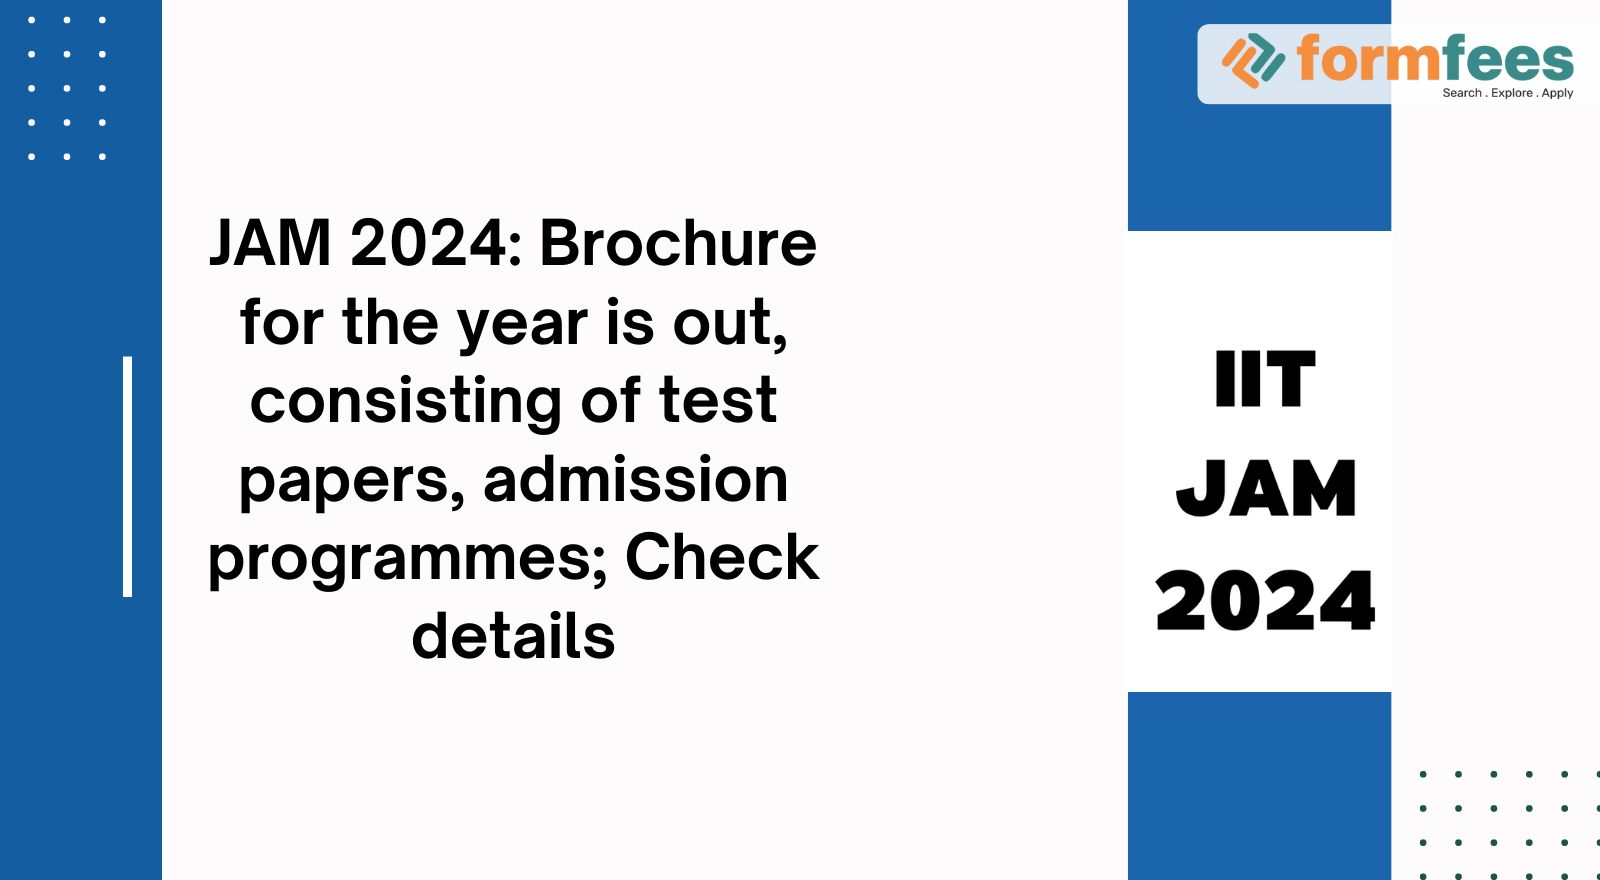 JAM 2024 Brochure for the year is out, consisting of test papers